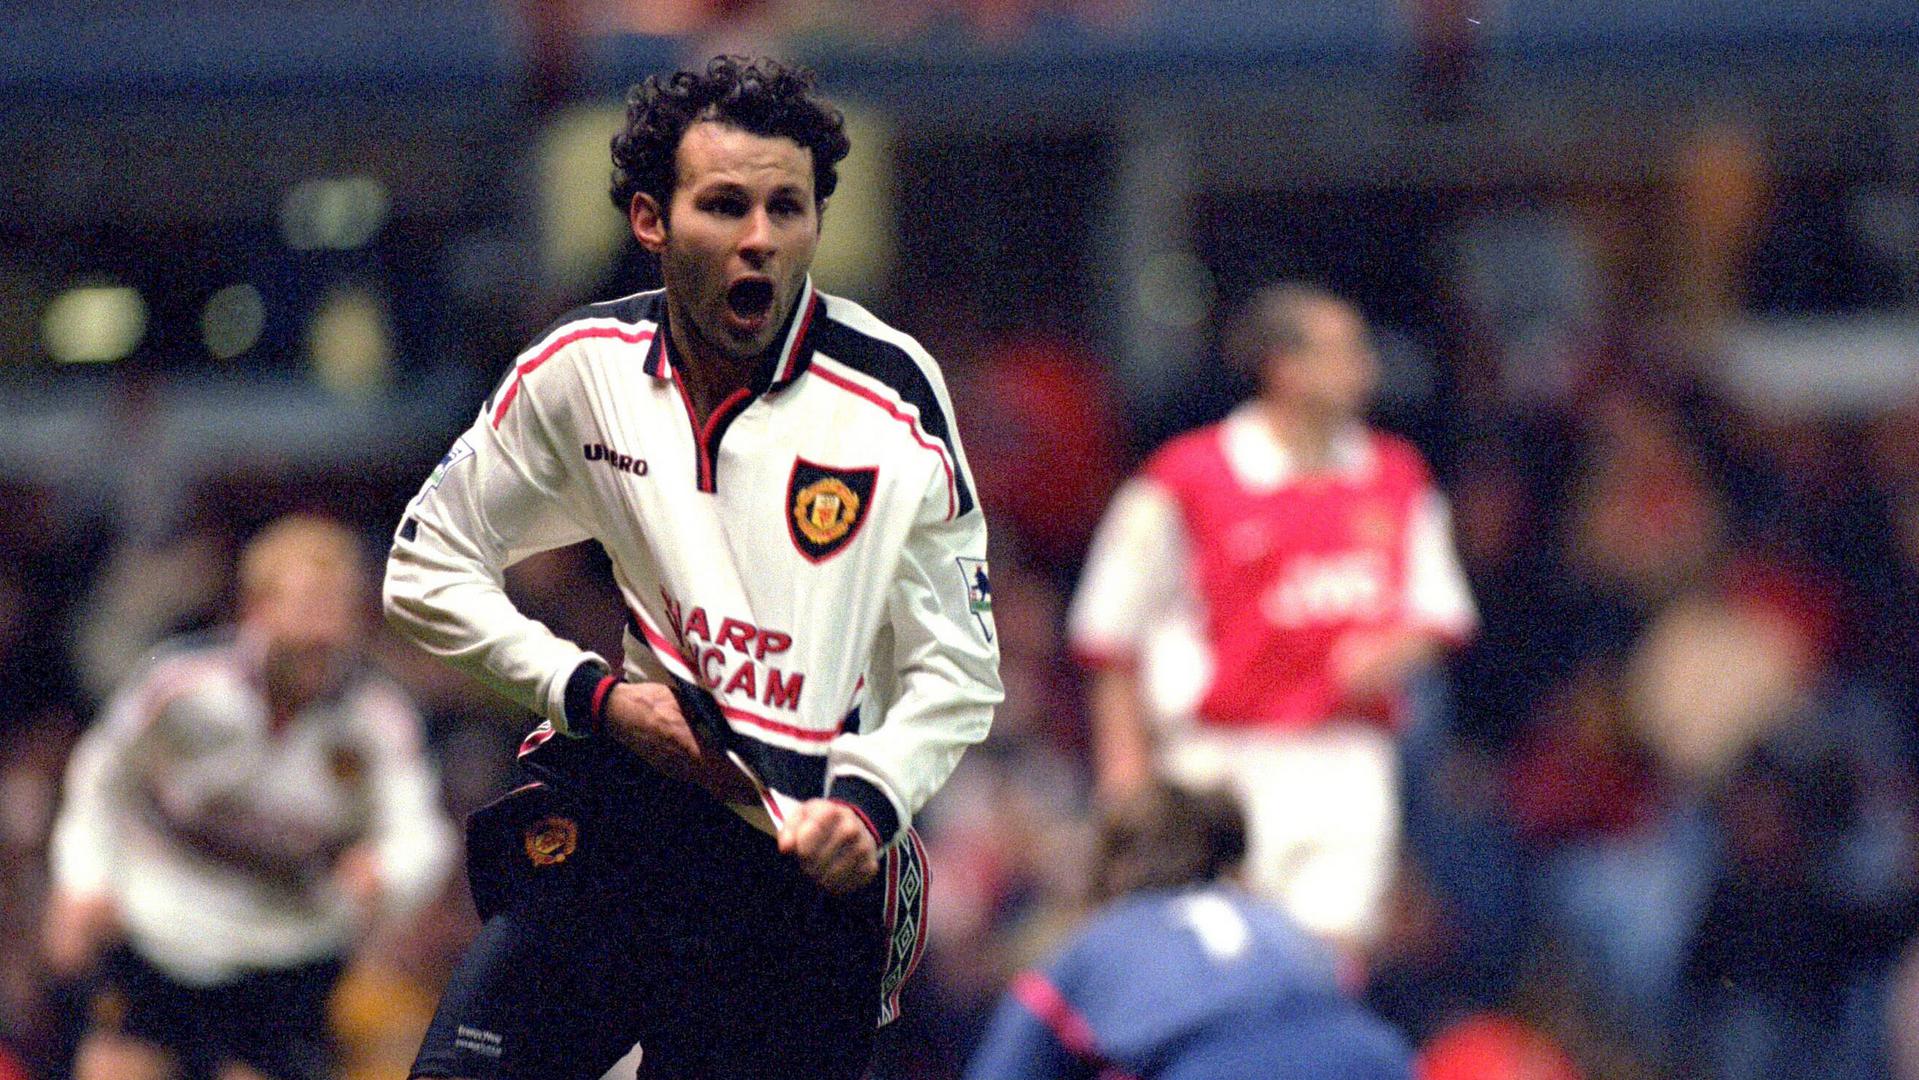 Ryan Giggs has played 963 matches for Manchester United, which is the most in the club's history | SportzPoint